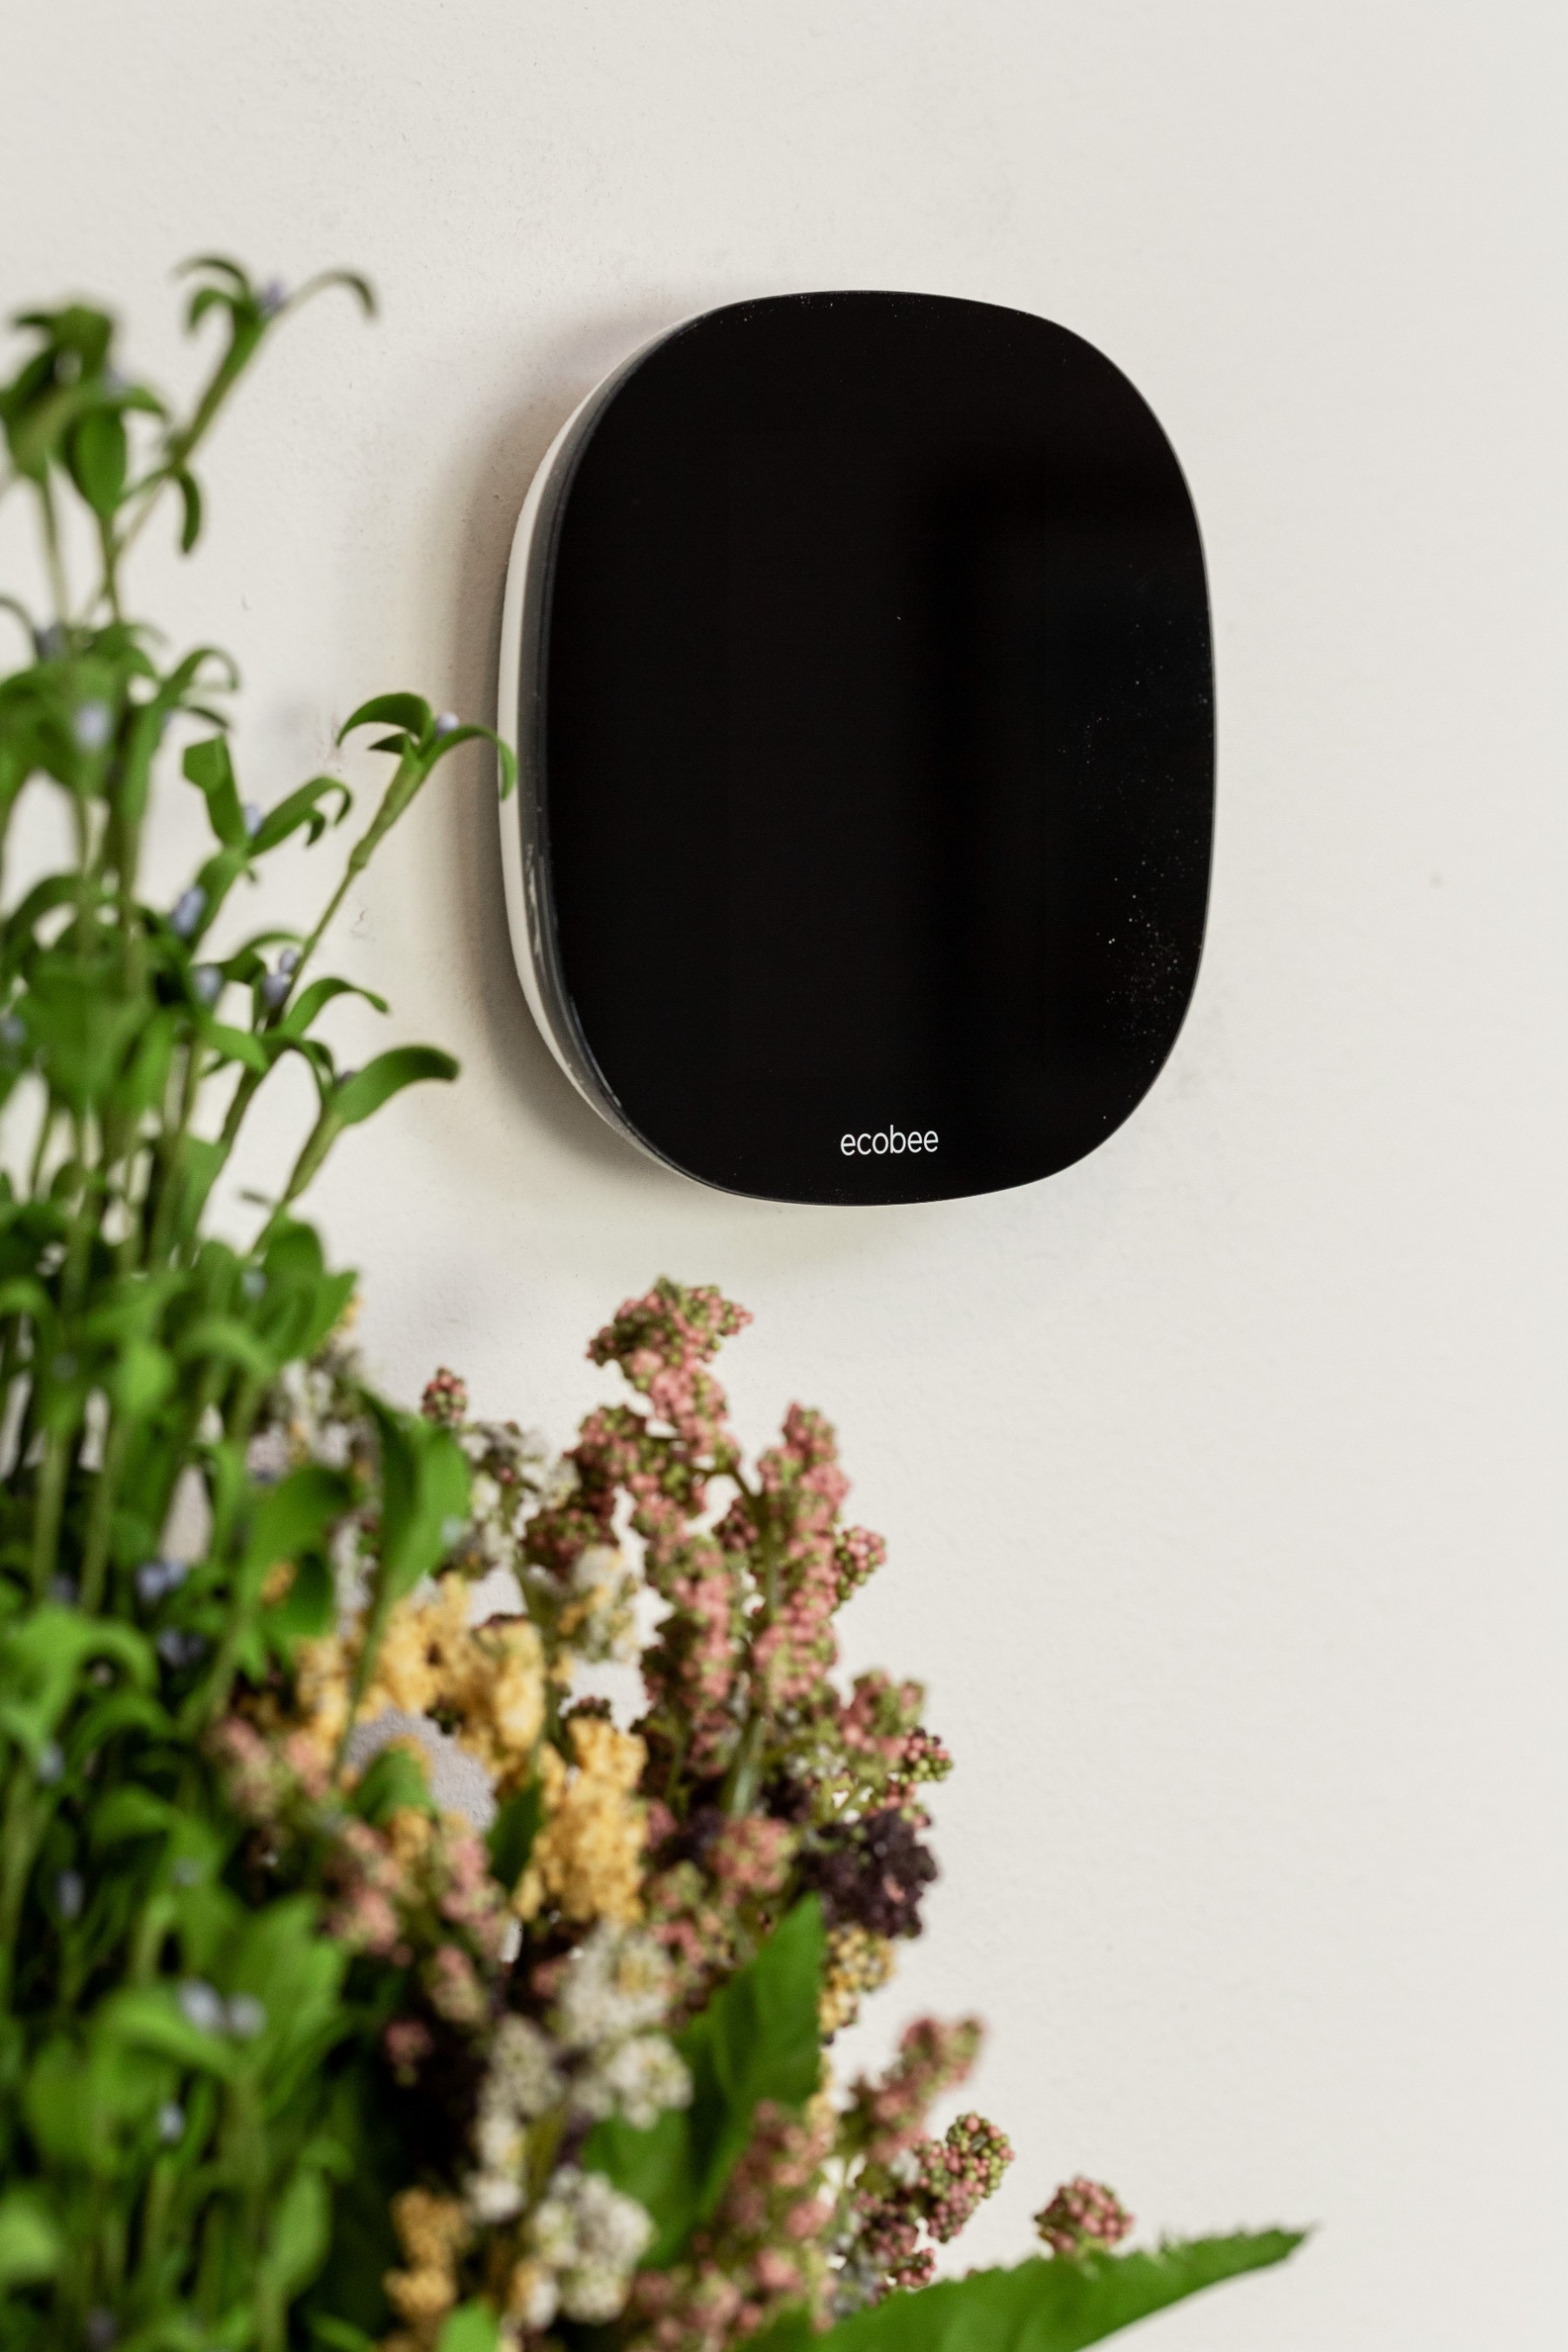 Exclusive to Clayton Built homes in the off-site home building industry, ecobee smart thermostats are engineered for enhanced energy savings.